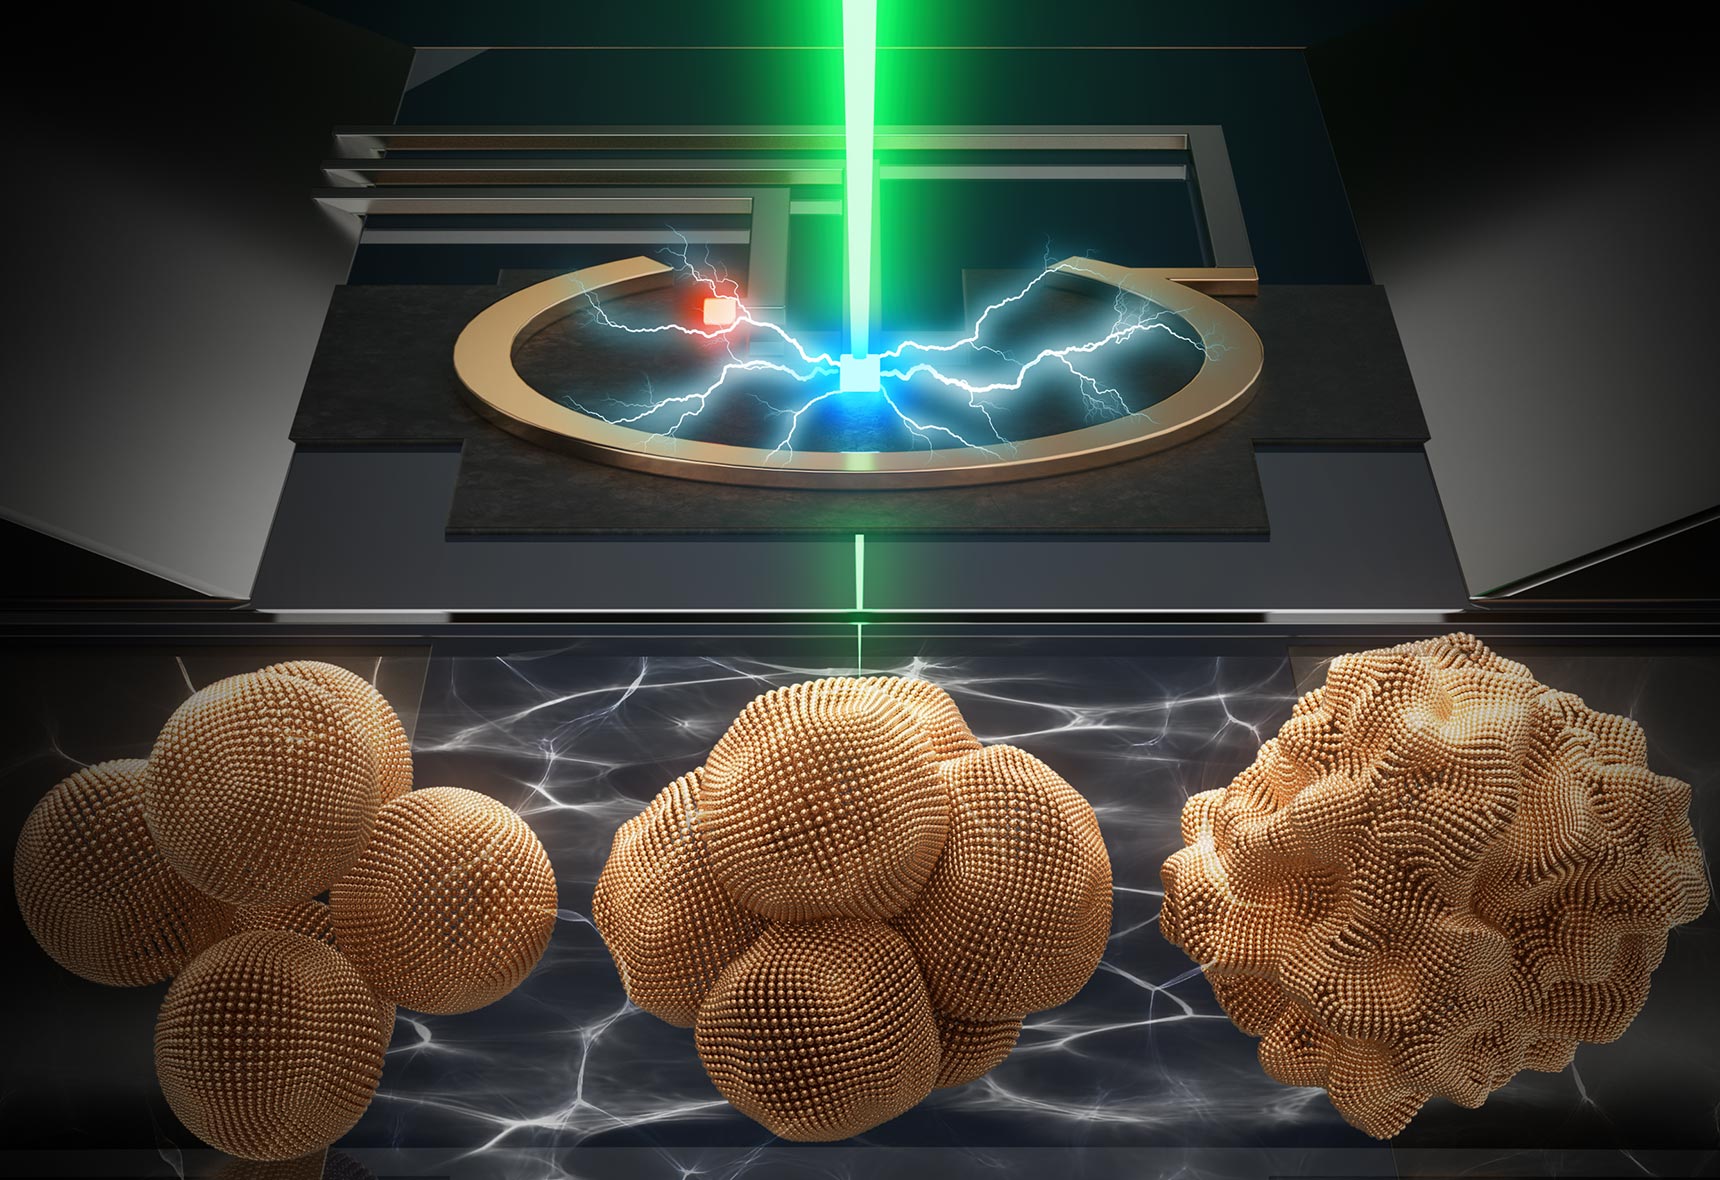 Artist’s rendering of a copper nanoparticle life cycle during CO2 electrolysis: Copper nanoparticles (left) combine into larger metallic copper “nanograins” (right) within seconds of the electrochemical reaction, reducing CO2 into new multicarbon products.